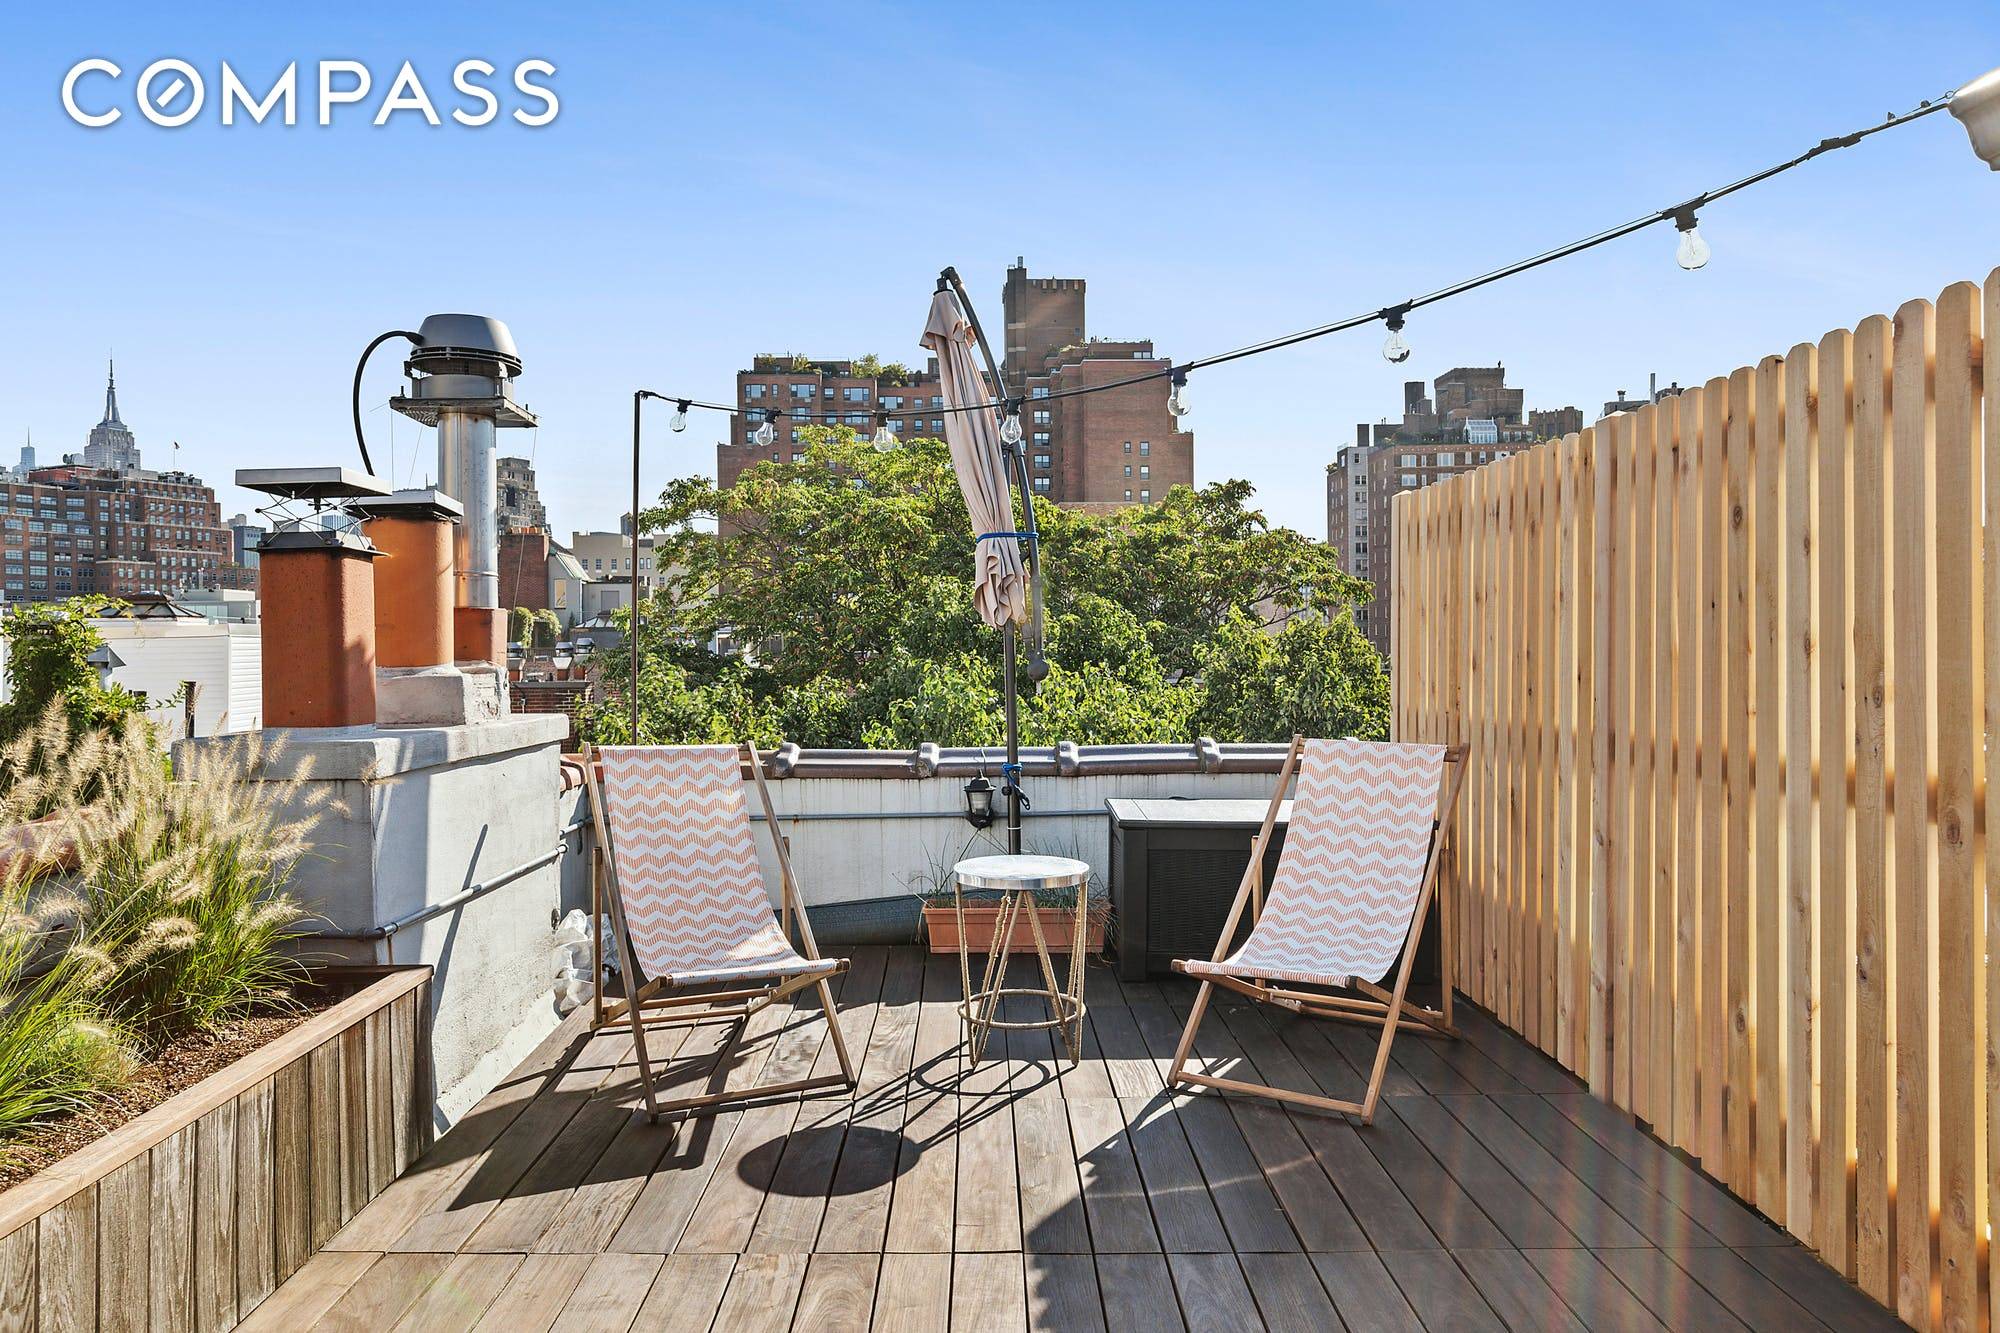 Whether one is enjoying the city views on the spectacular private roof deck or warming up by the wood burning fireplace, this bright, top floor West Village mini loft is ...